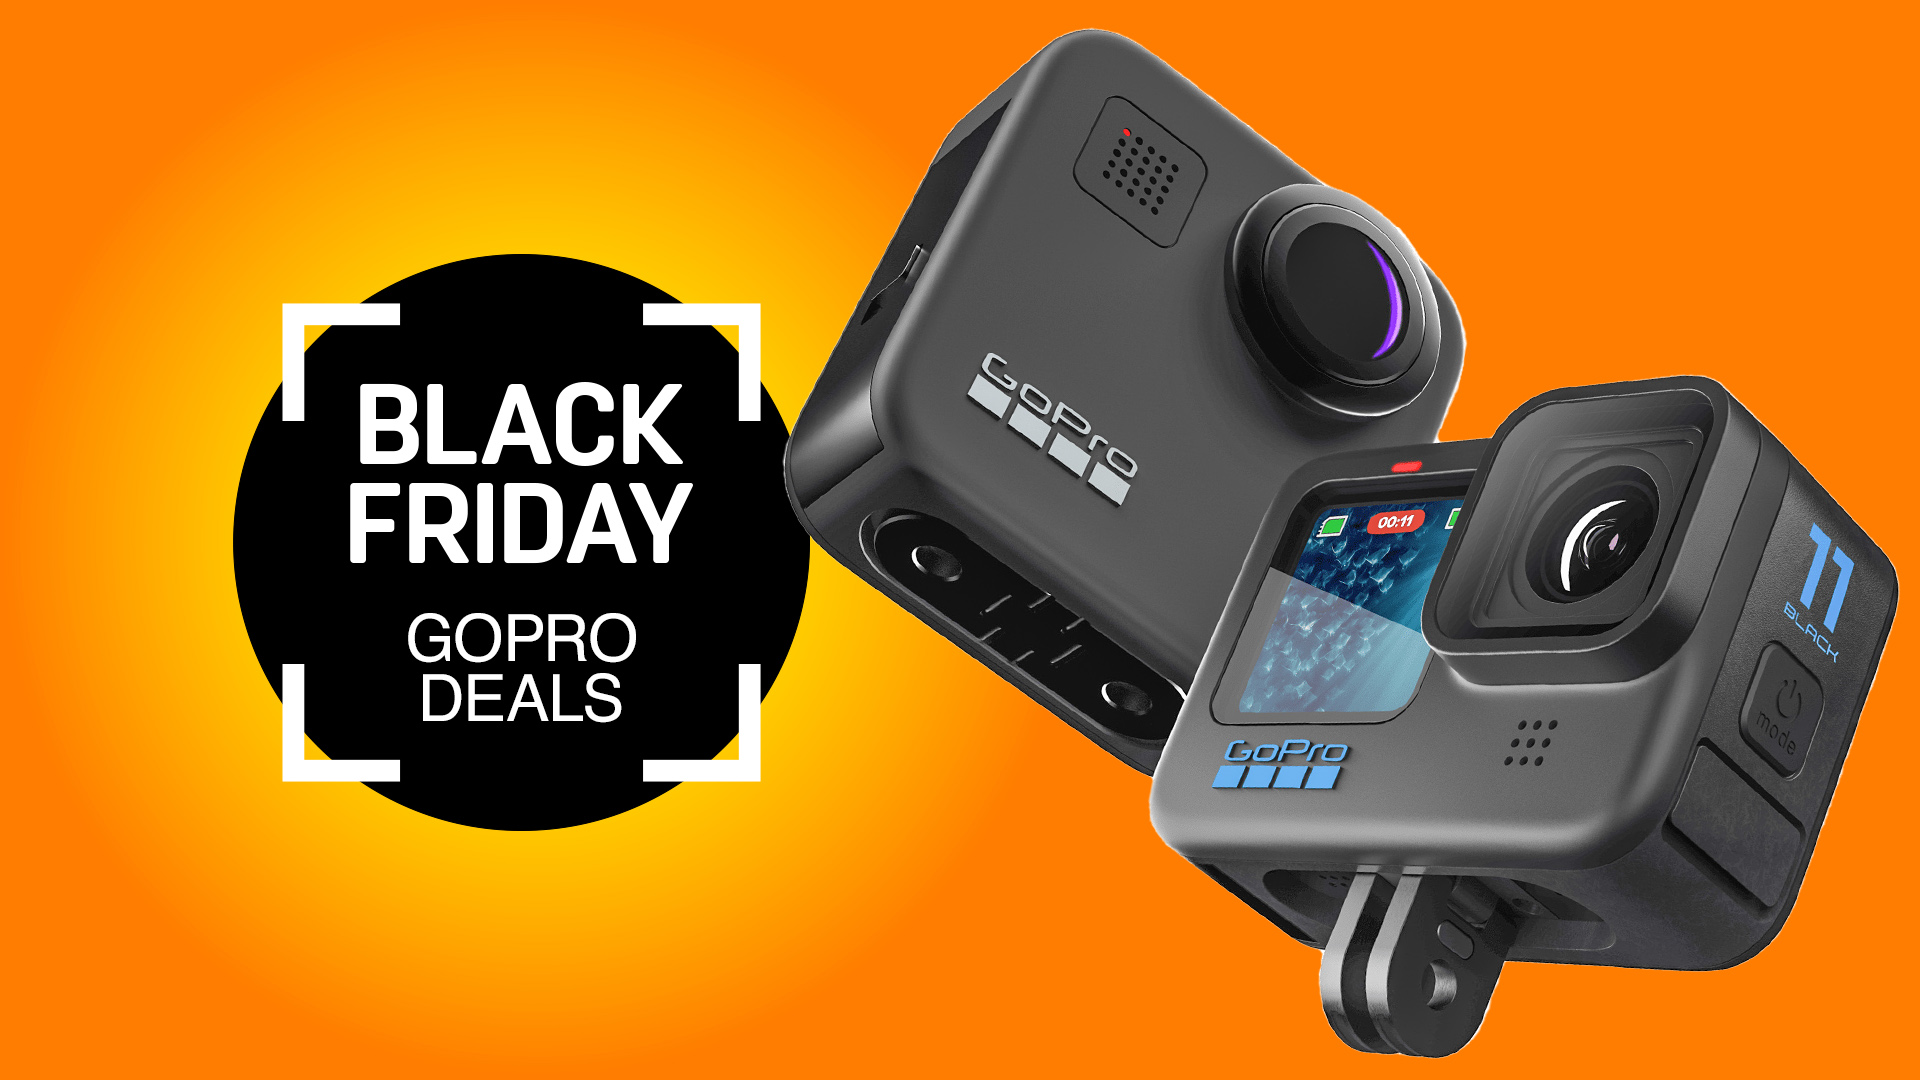 Black Friday GoPro deals: best action camera savings available today